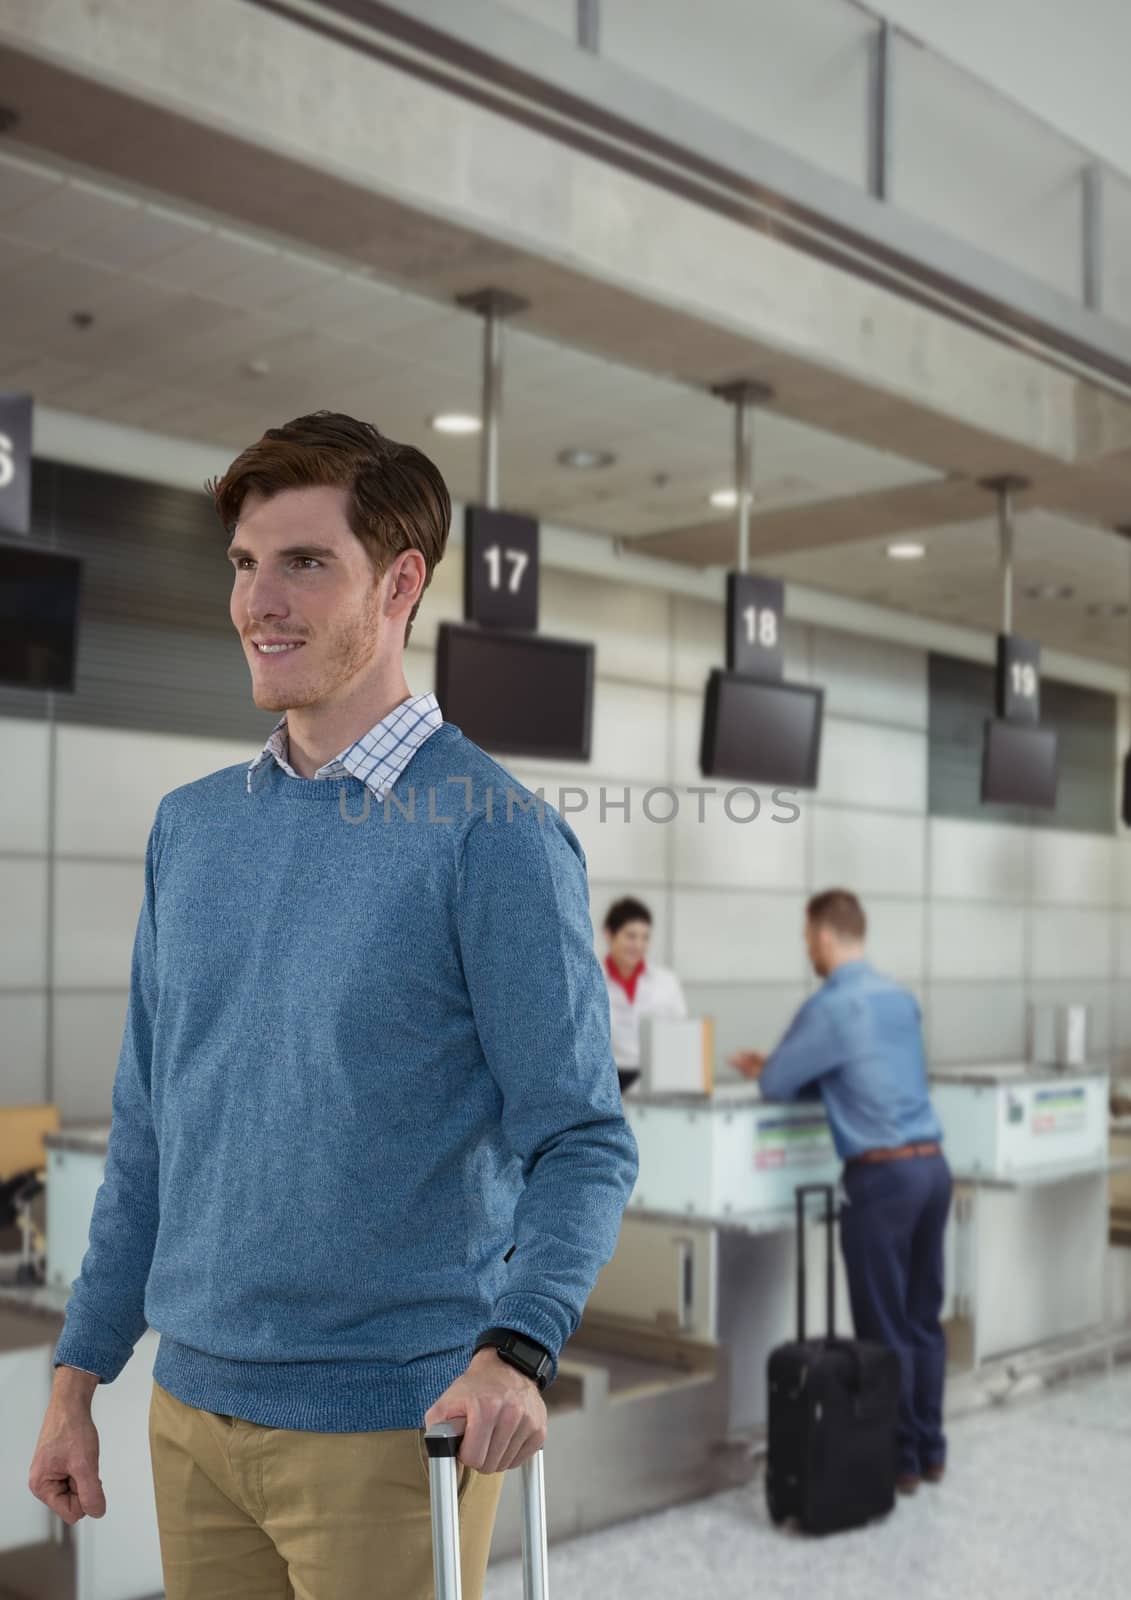 Digital composite of Man carrying luggage in airport check in area